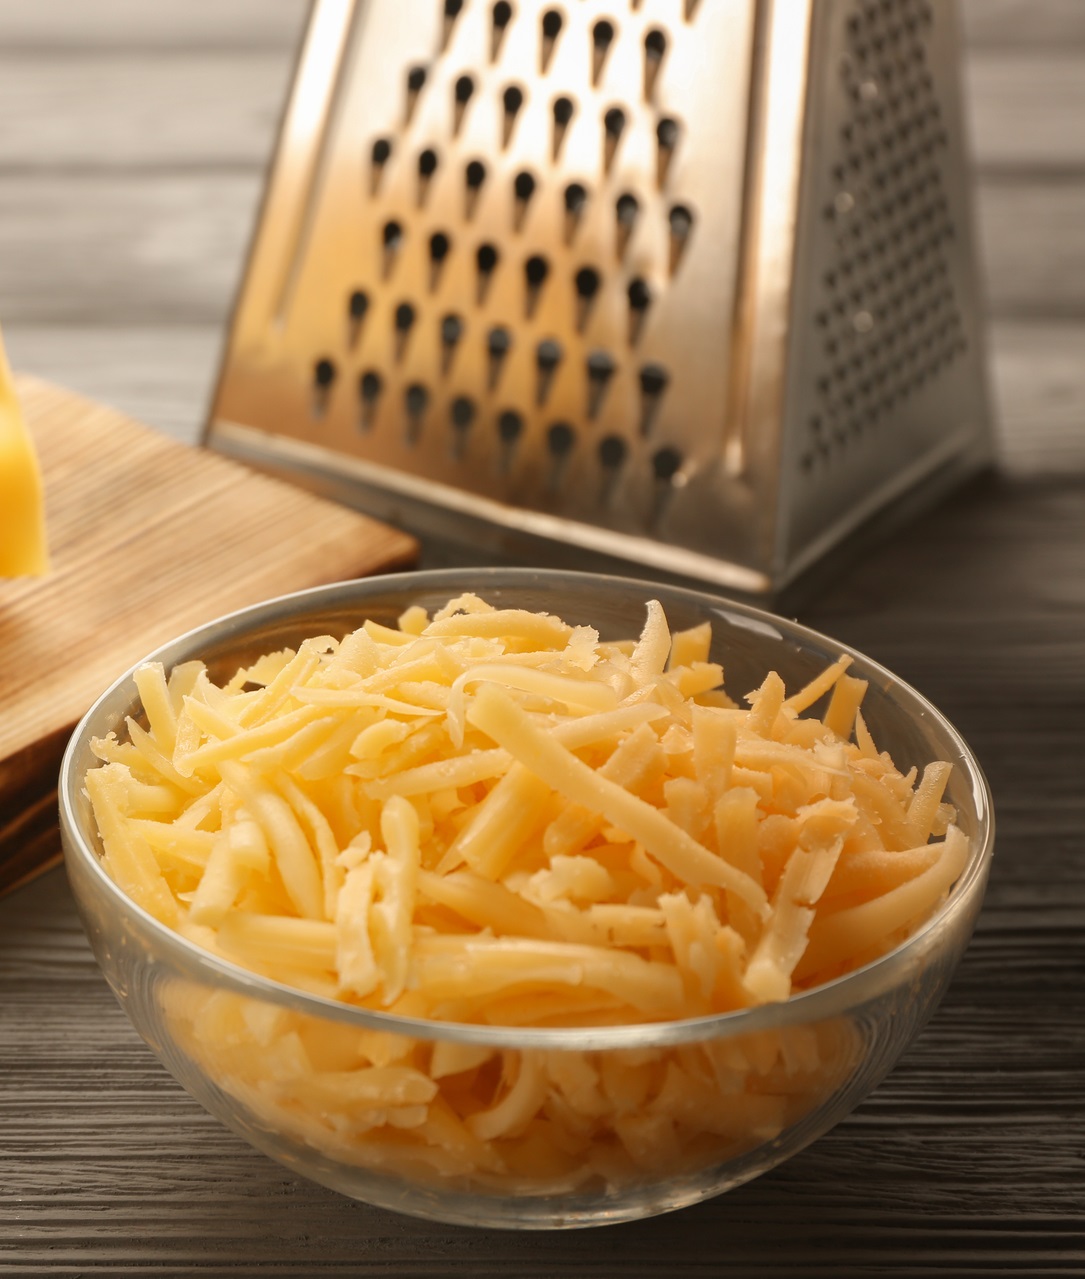 Grated cheese in a glass bowl.